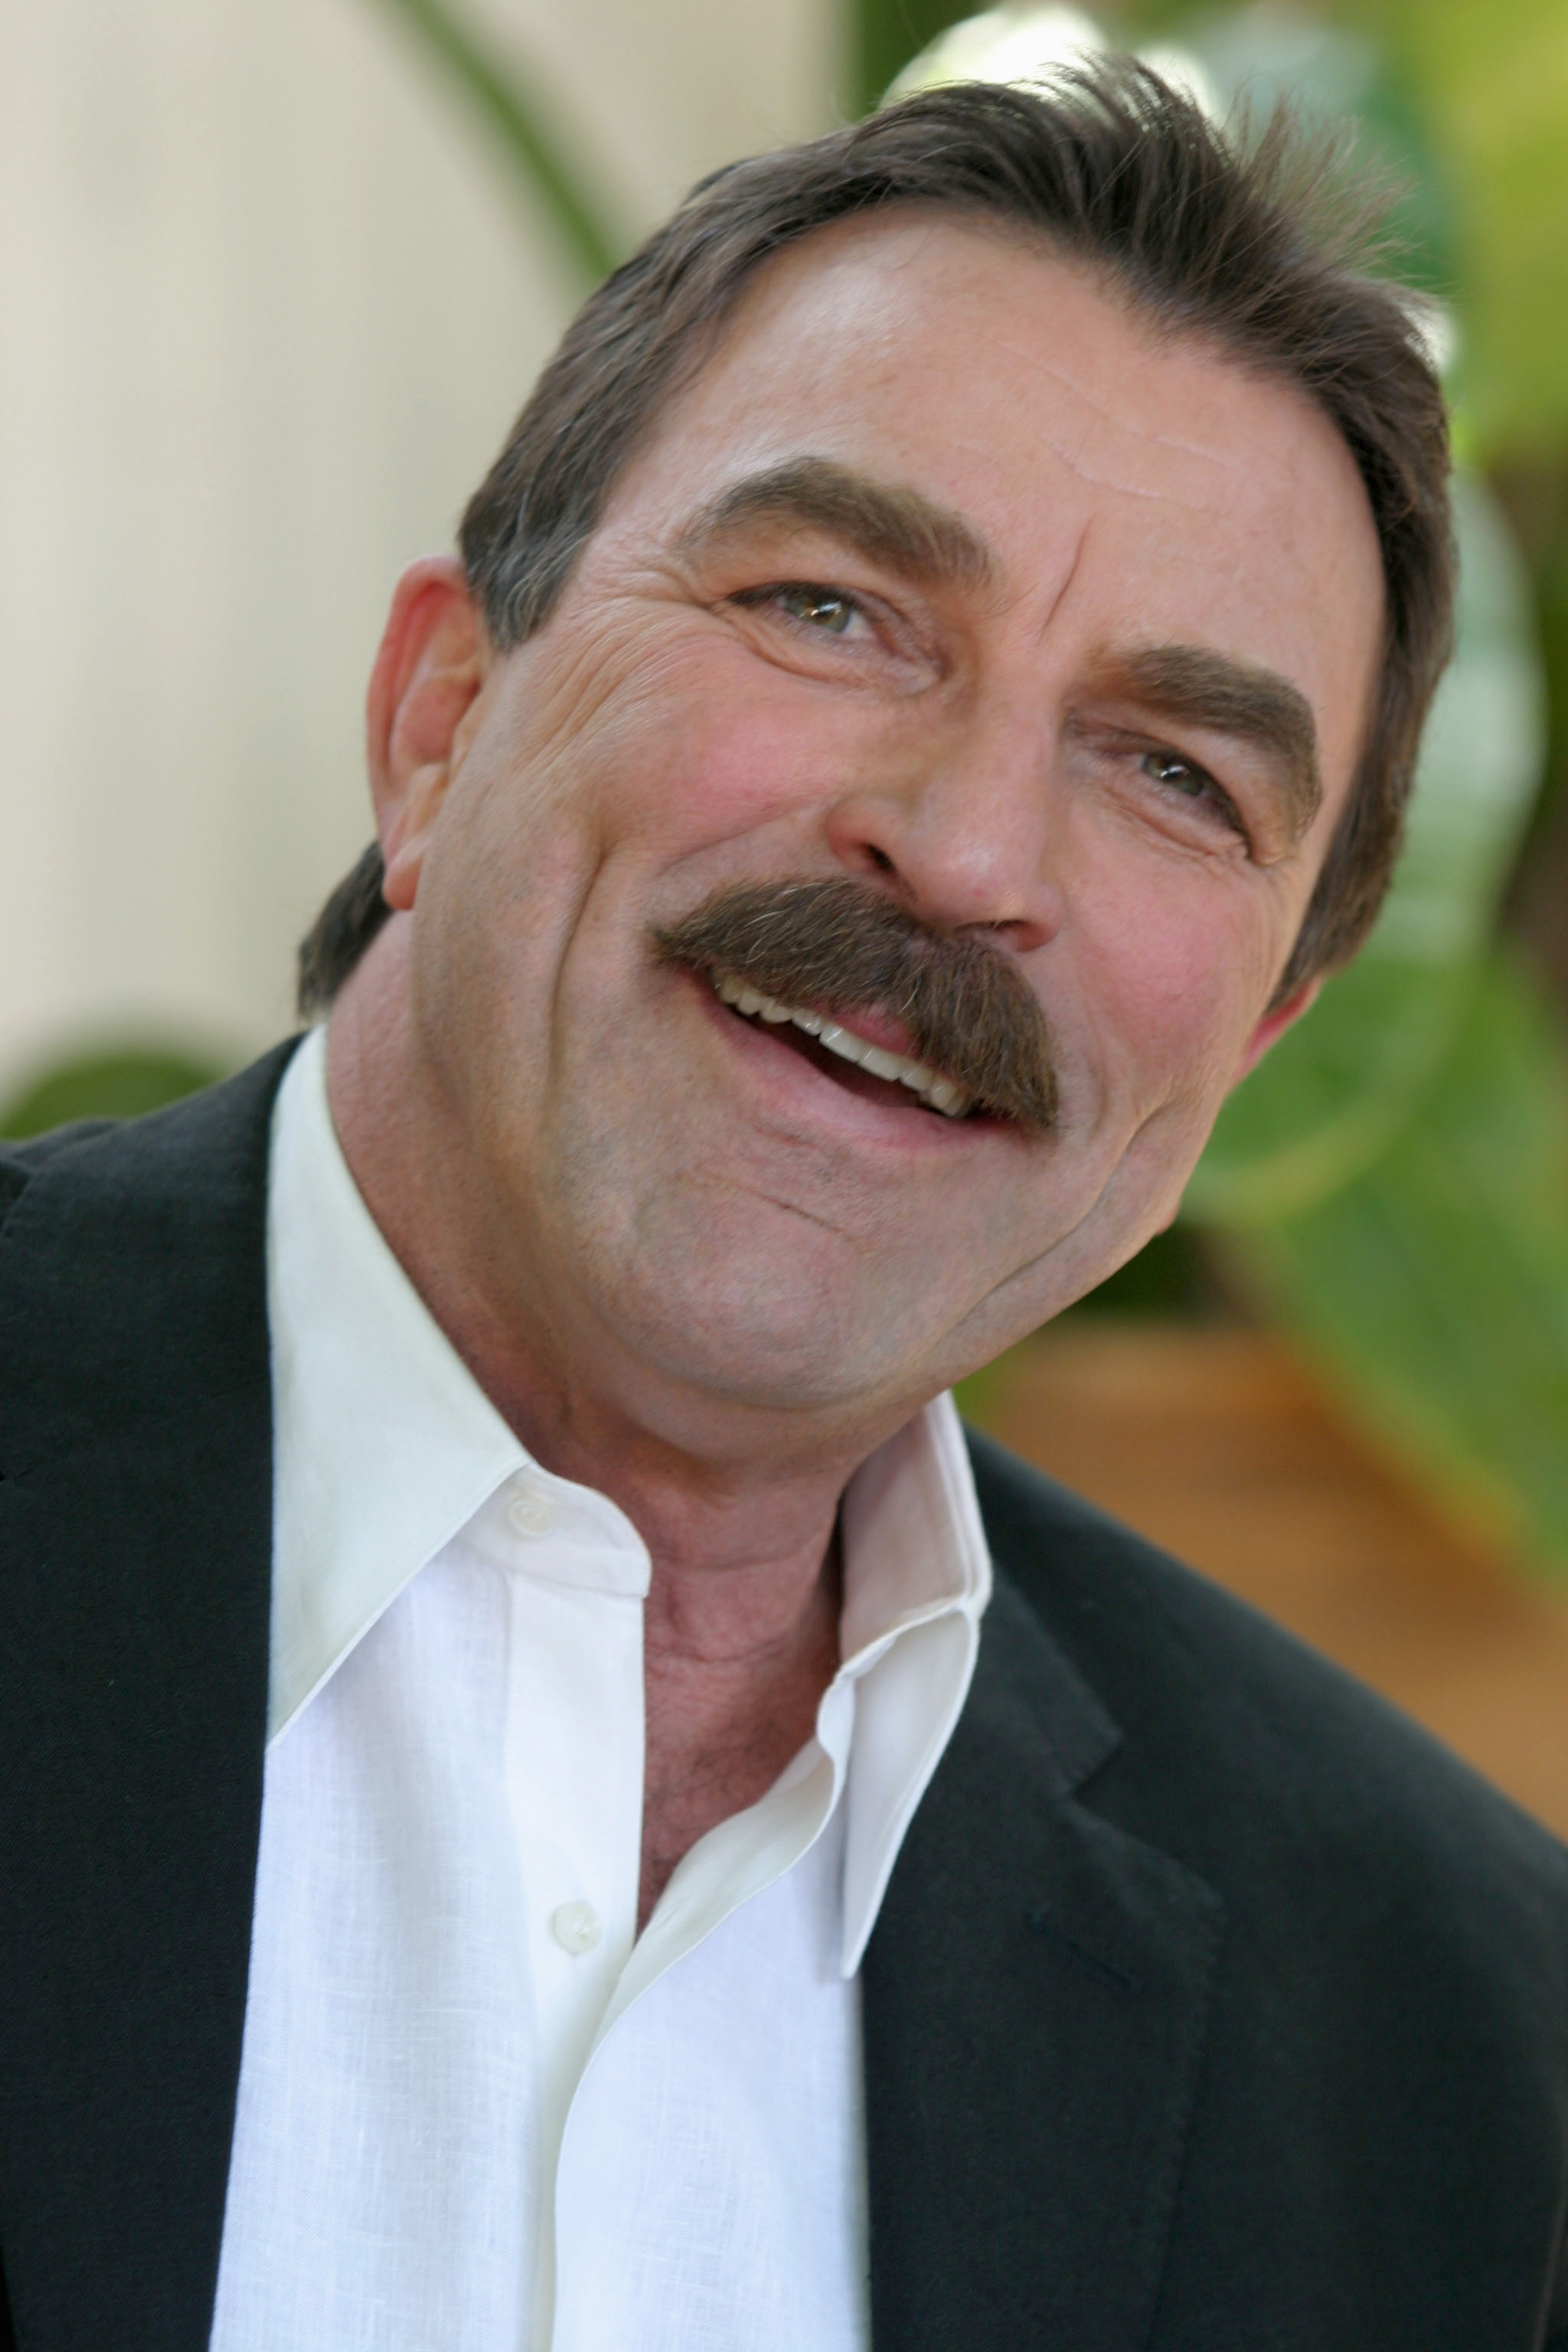 Tom Selleck makes an appearance at the office of the Hollywood Foreign Press Association (HFPA) on April 18, 2006, in Los Angeles, California | Source: Getty Images